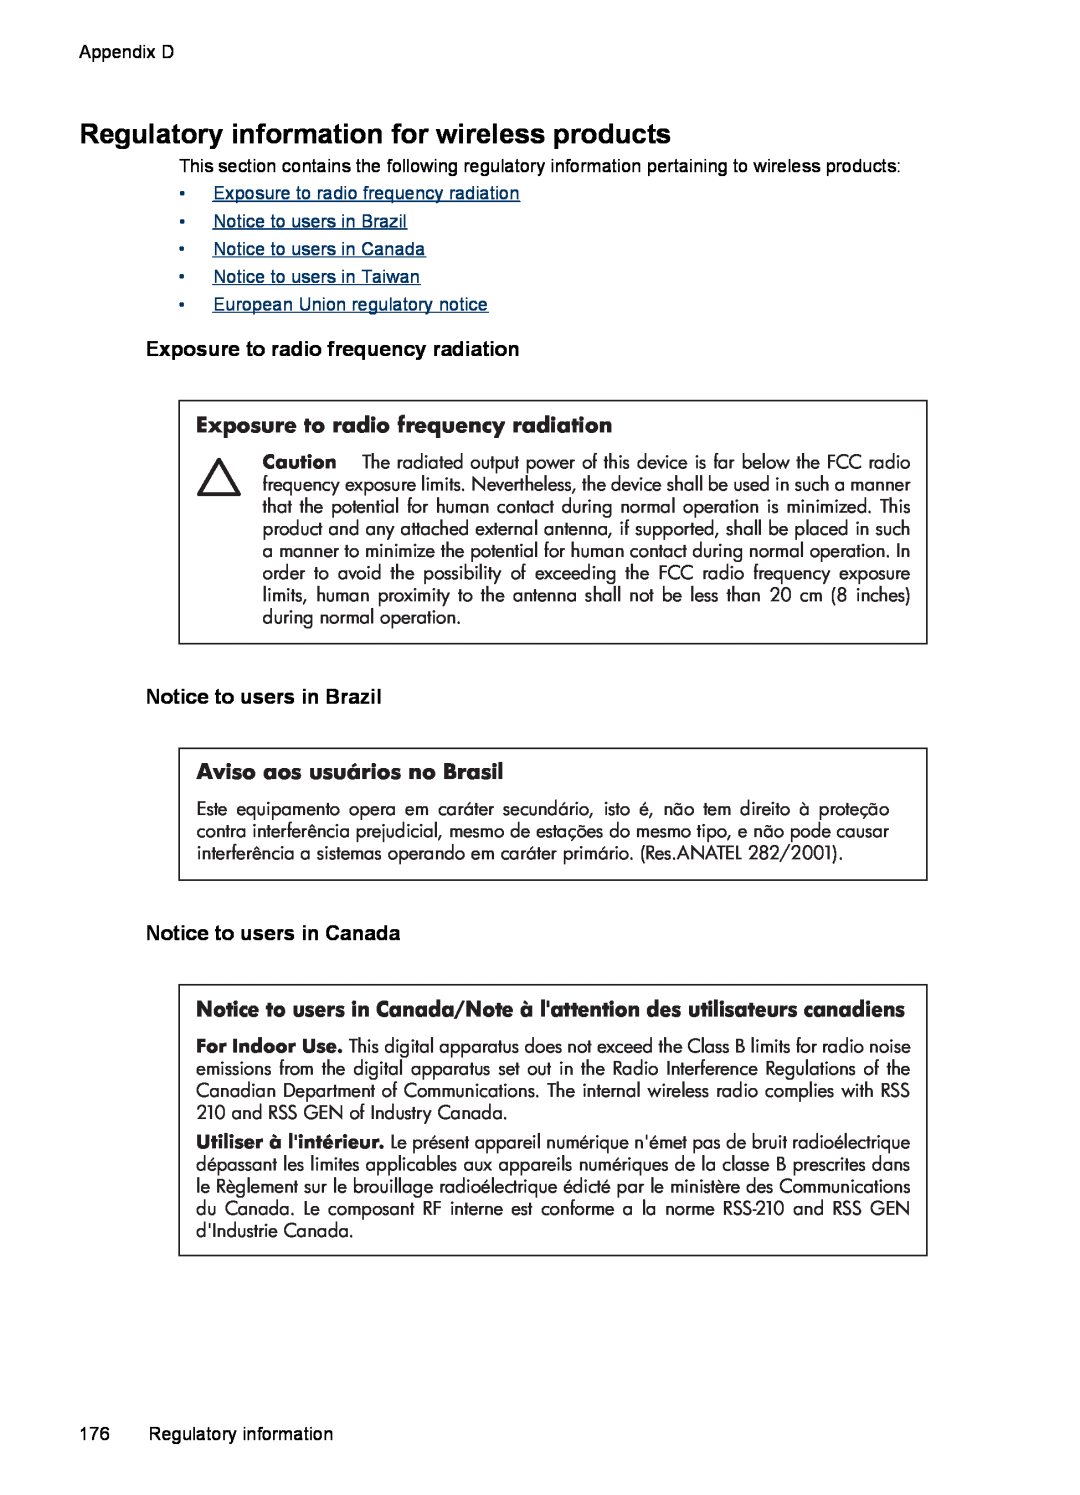 HP J4680 Regulatory information for wireless products, Exposure to radio frequency radiation, Notice to users in Brazil 